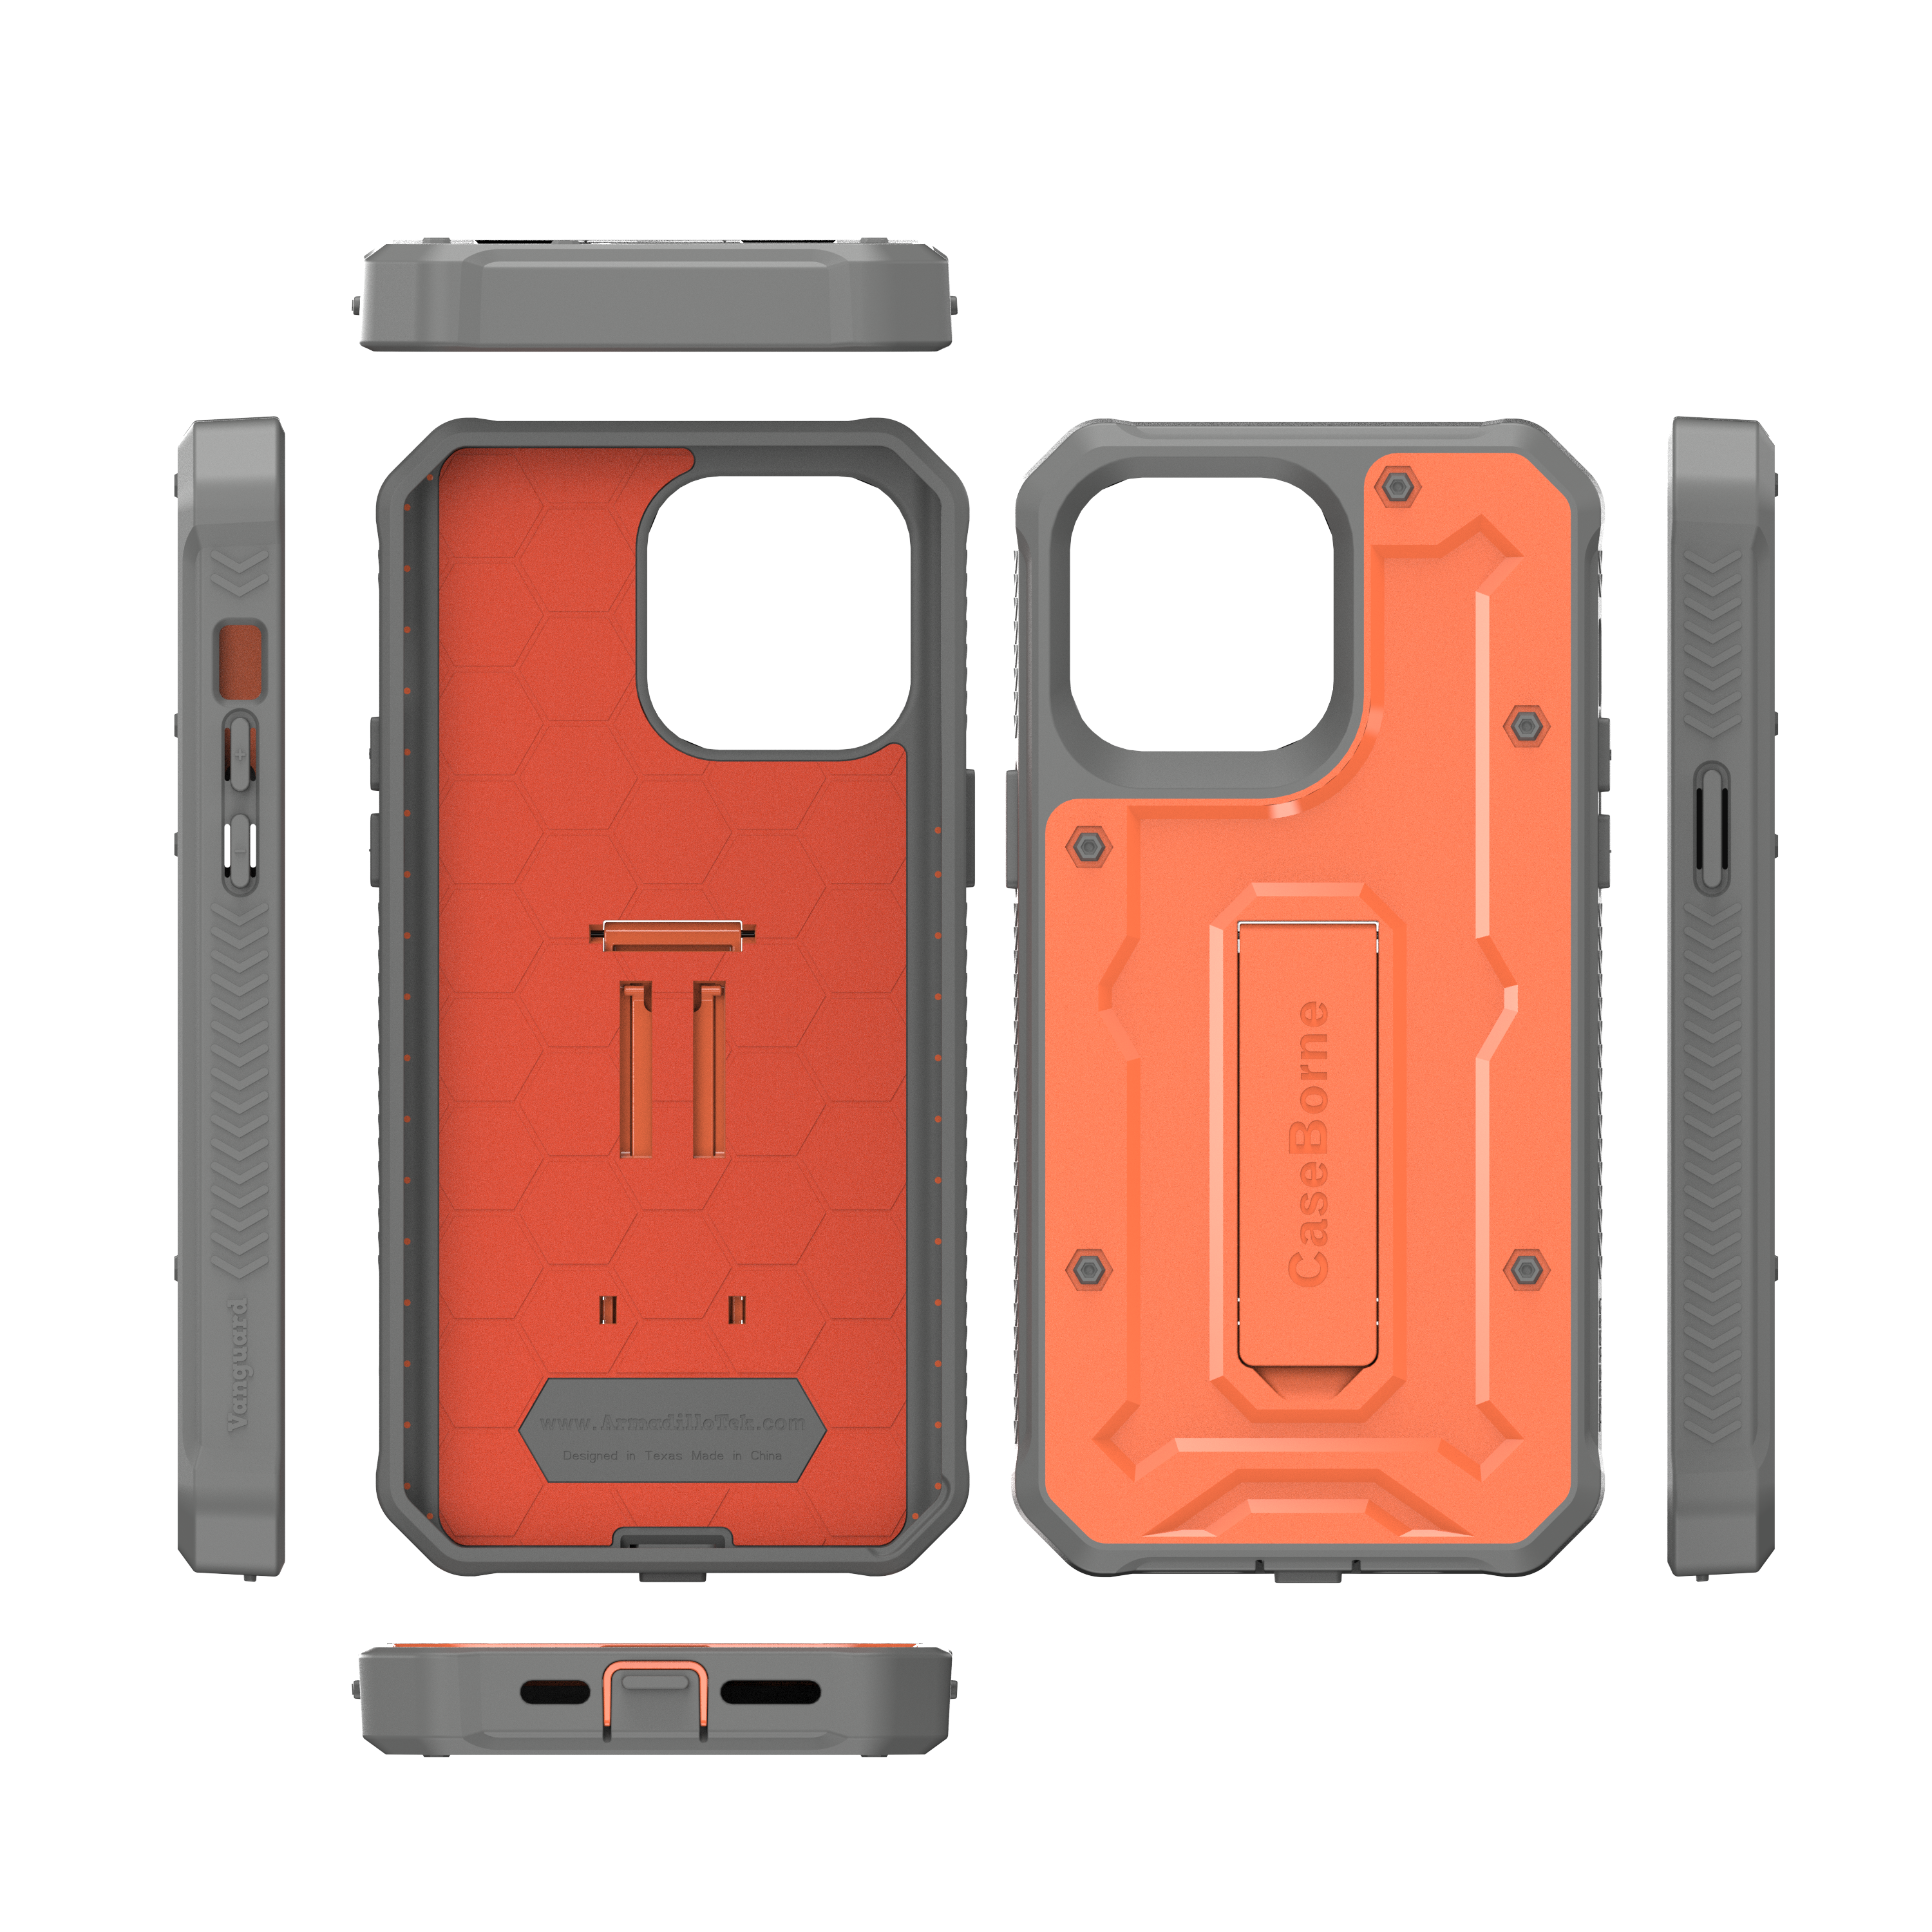 vArmor iPhone 14 Pro Max Holster Case